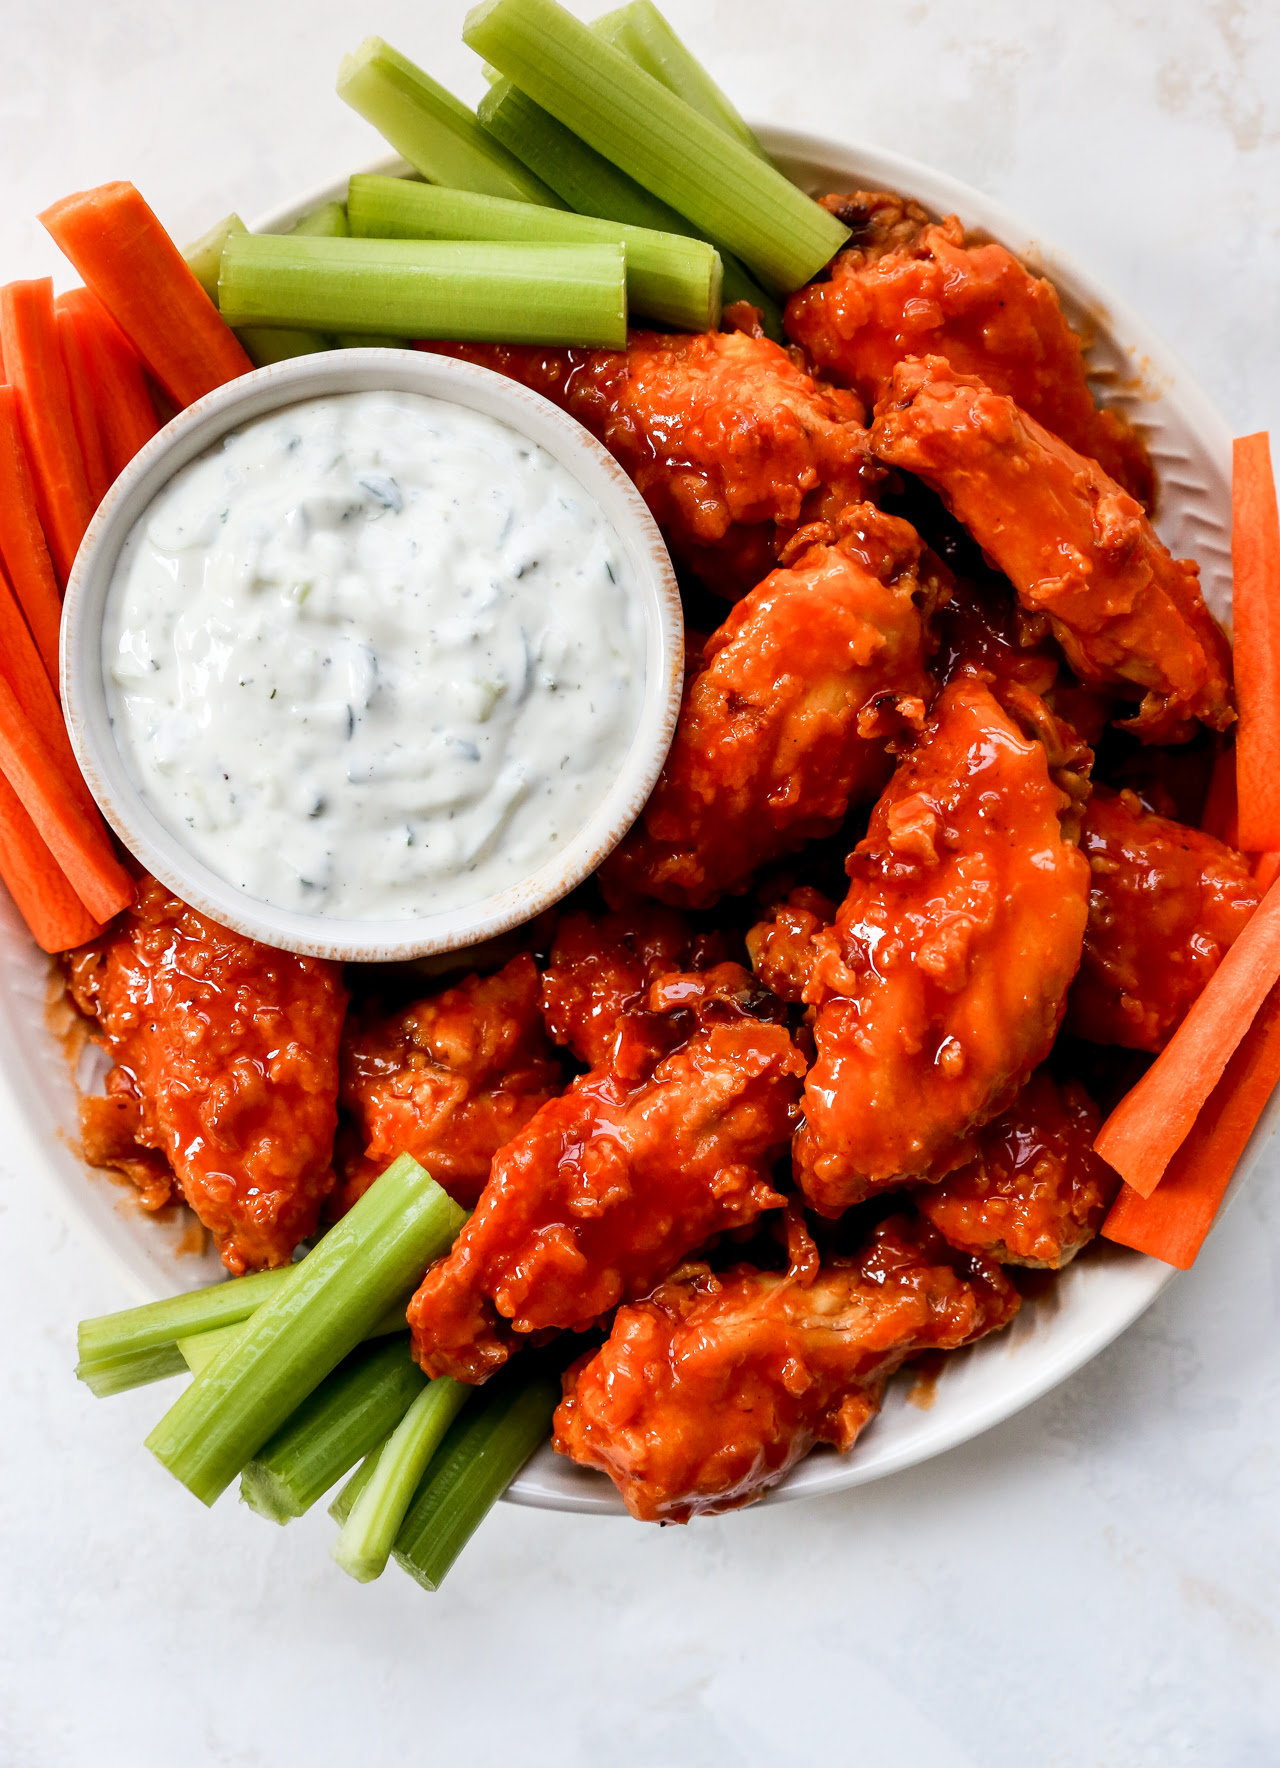 And here's a visual for what you need. Hot Honey Buffalo Wings With Cucumber Ranch